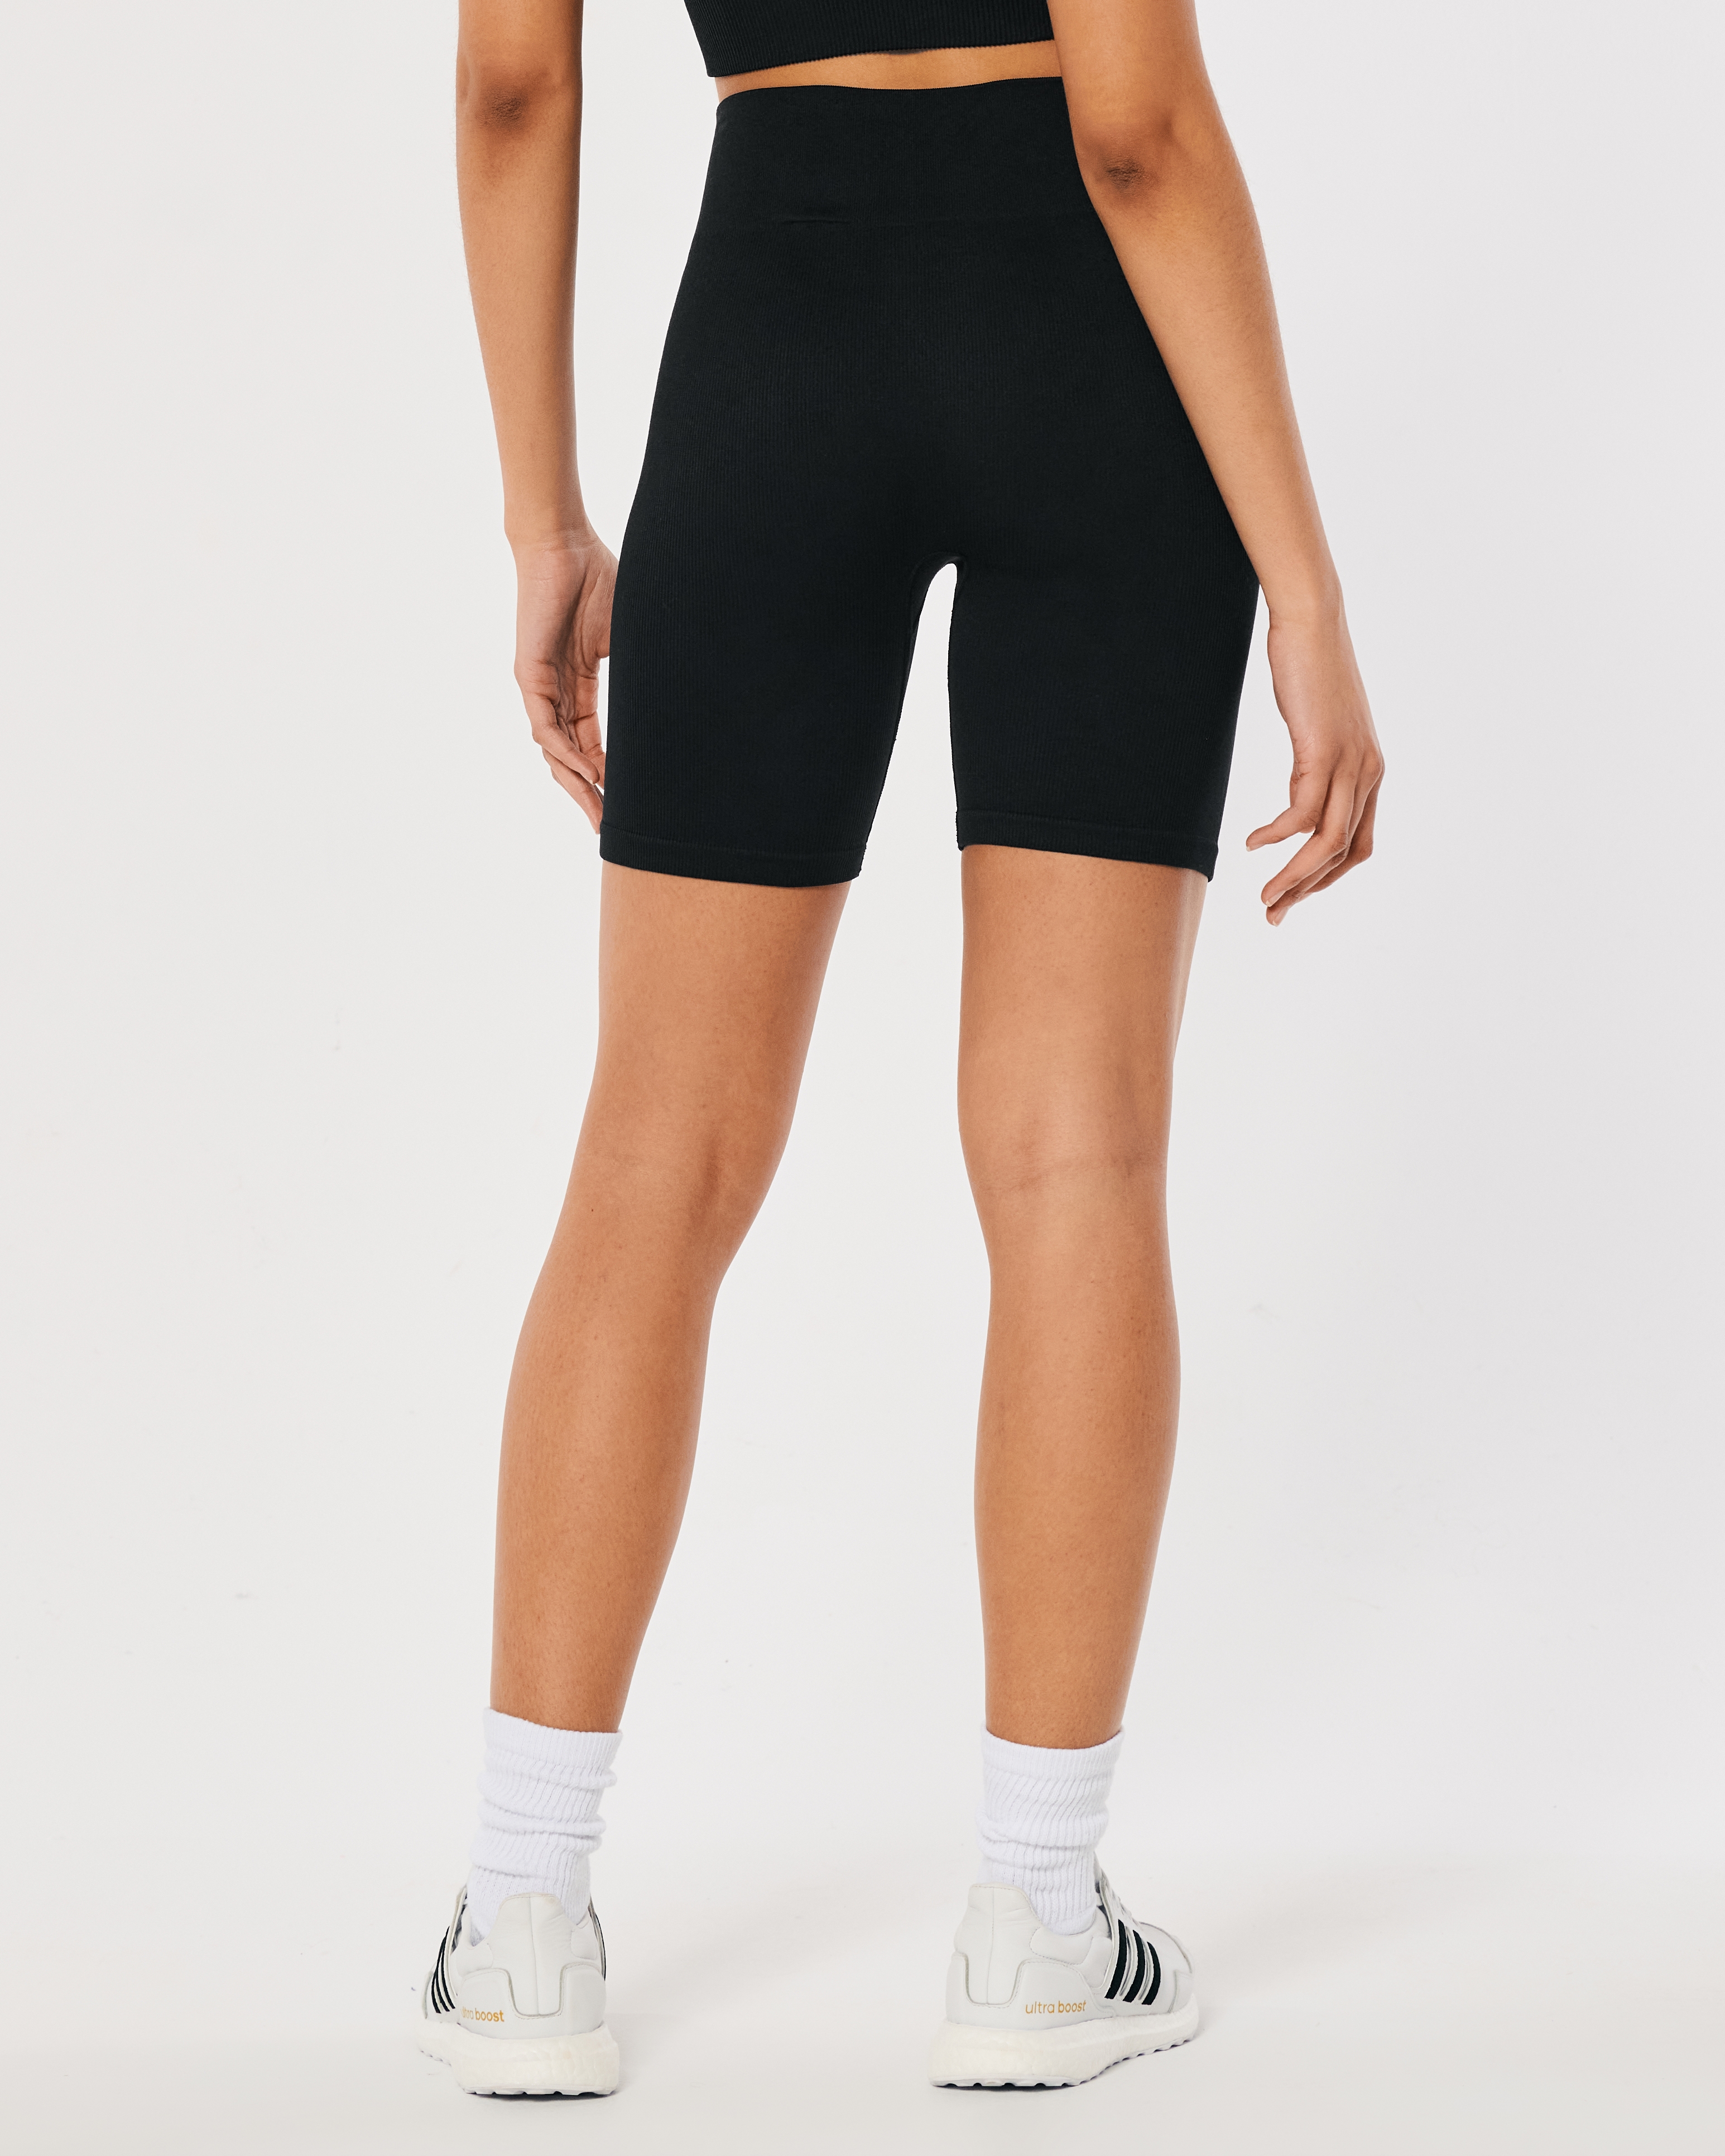 Gilly Hicks Active Seamless High-Rise Bike Shorts 7"